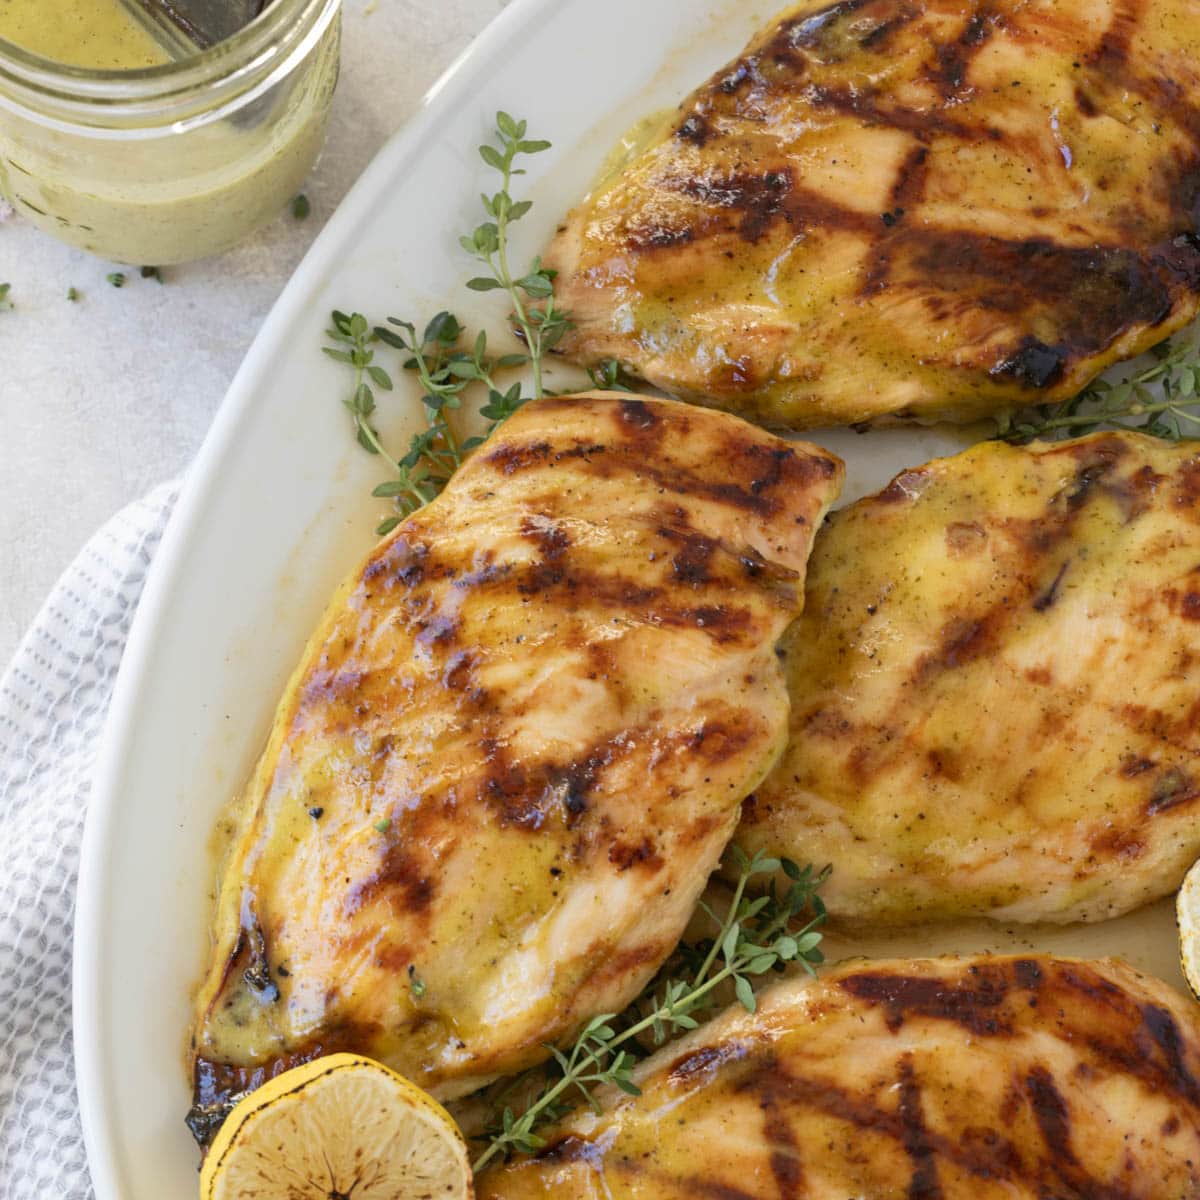 Platter of grilled chicken breasts with herbs and grilled lemon halves.